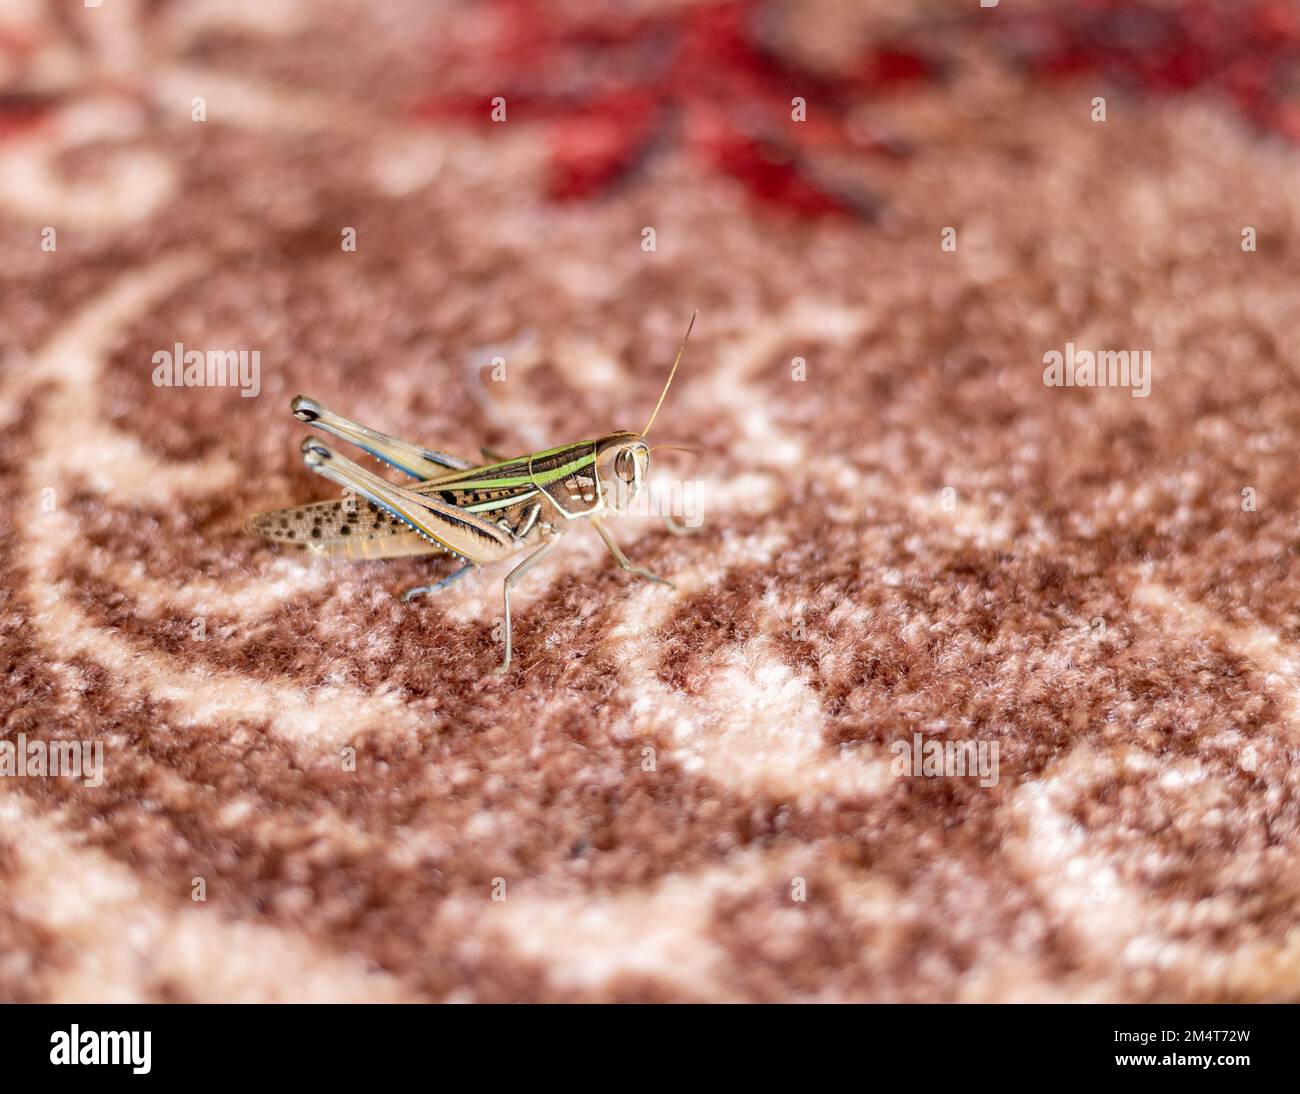 Grasshopper in a house sitting on a carpet in the room Stock Photo